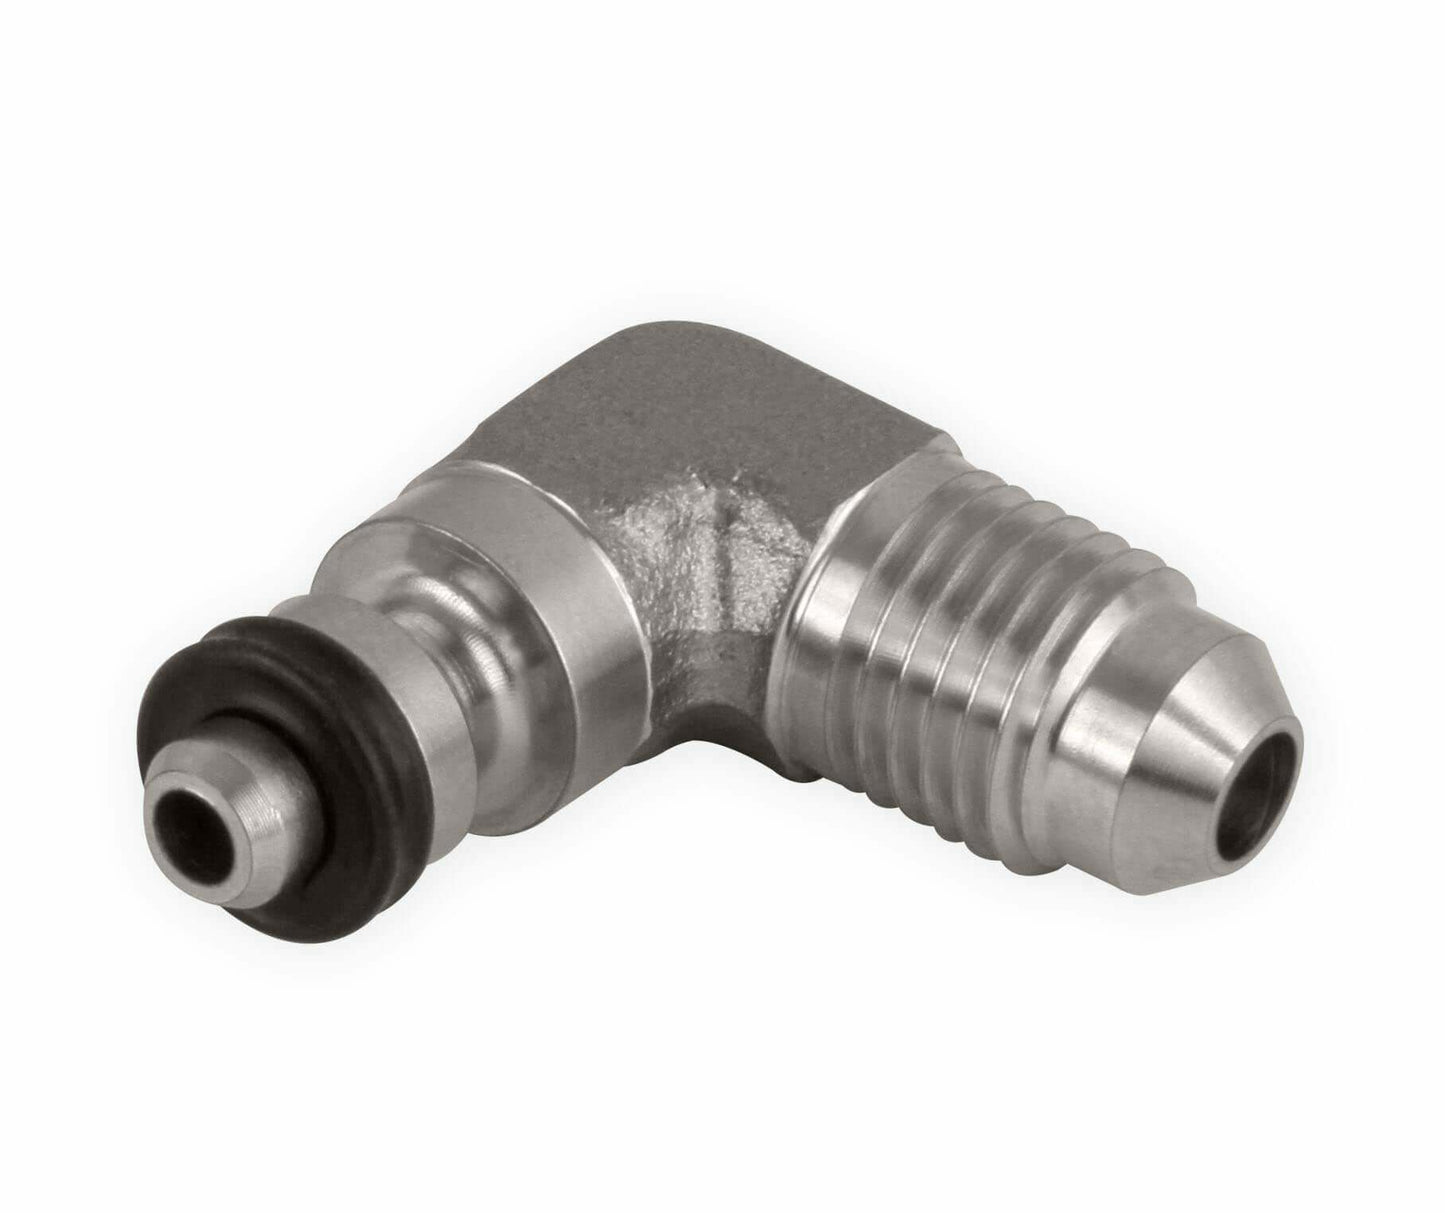 Earls Clutch Adapter Fitting - Early - 90 Degree - LS641002ERL